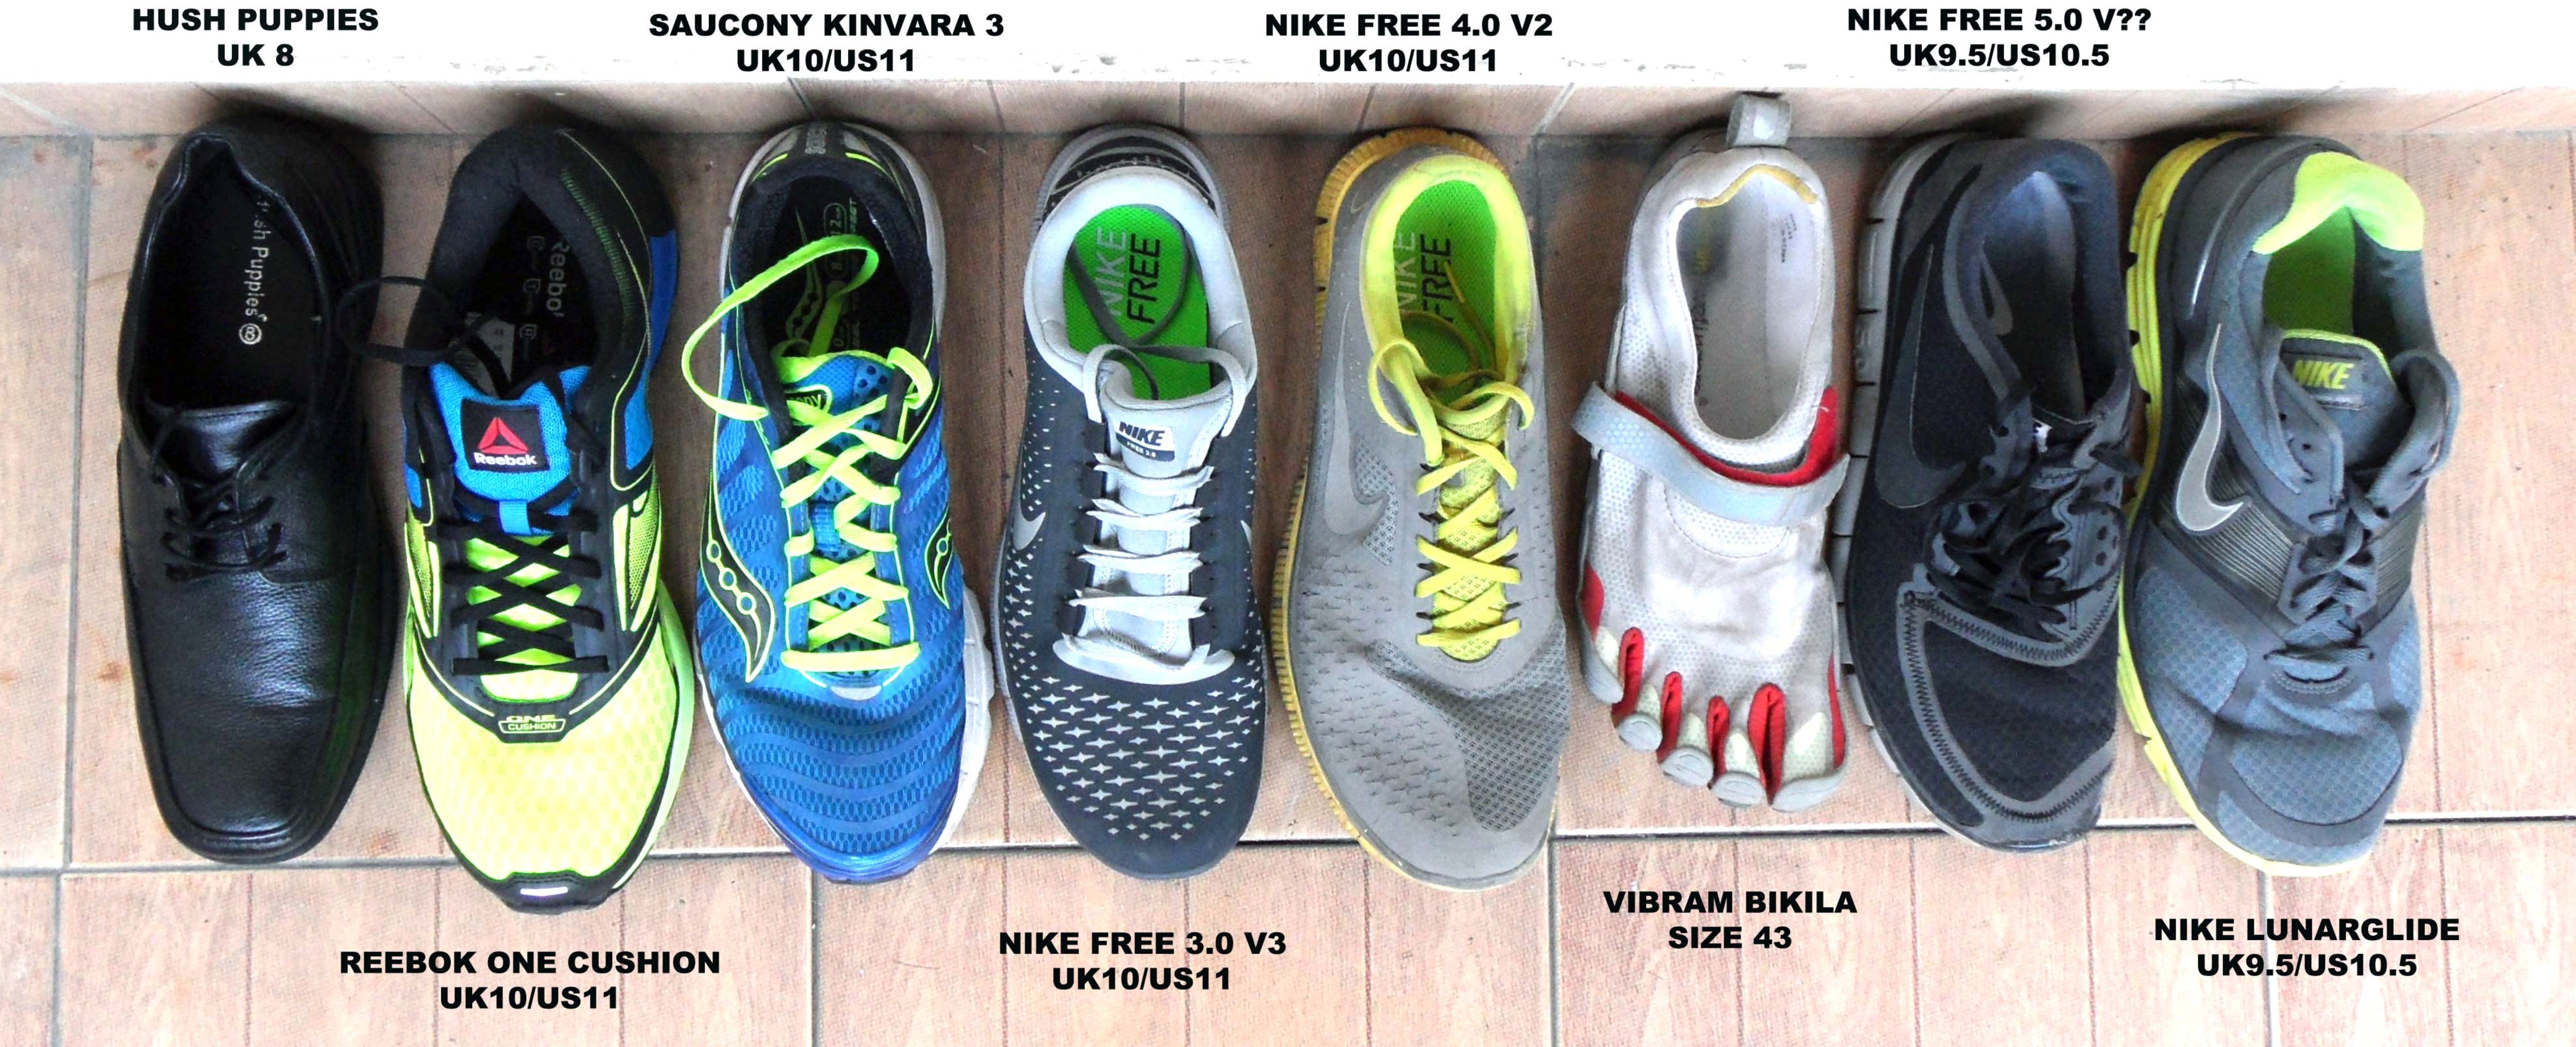 saucony shoe size compared to nike